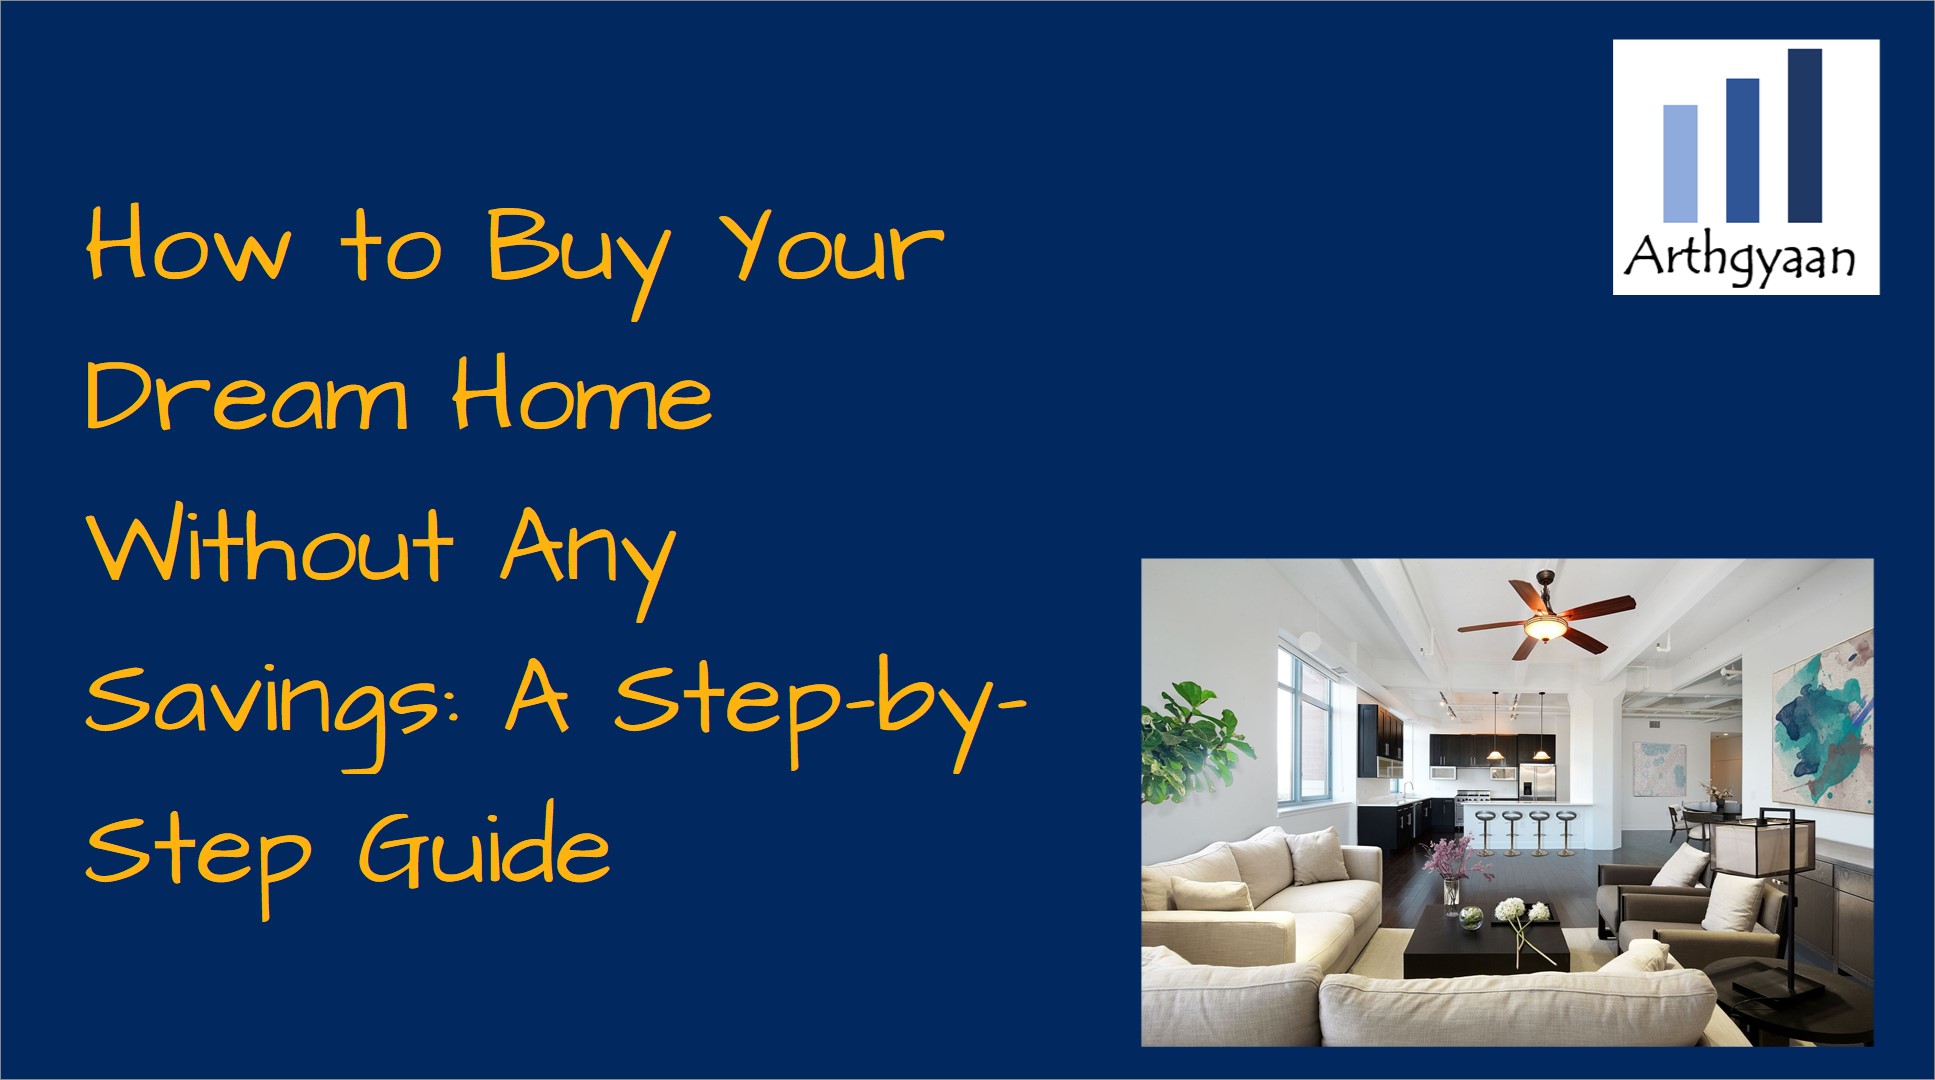 How to Buy Your Dream Home Without Any Savings: A Step-by-Step Guide